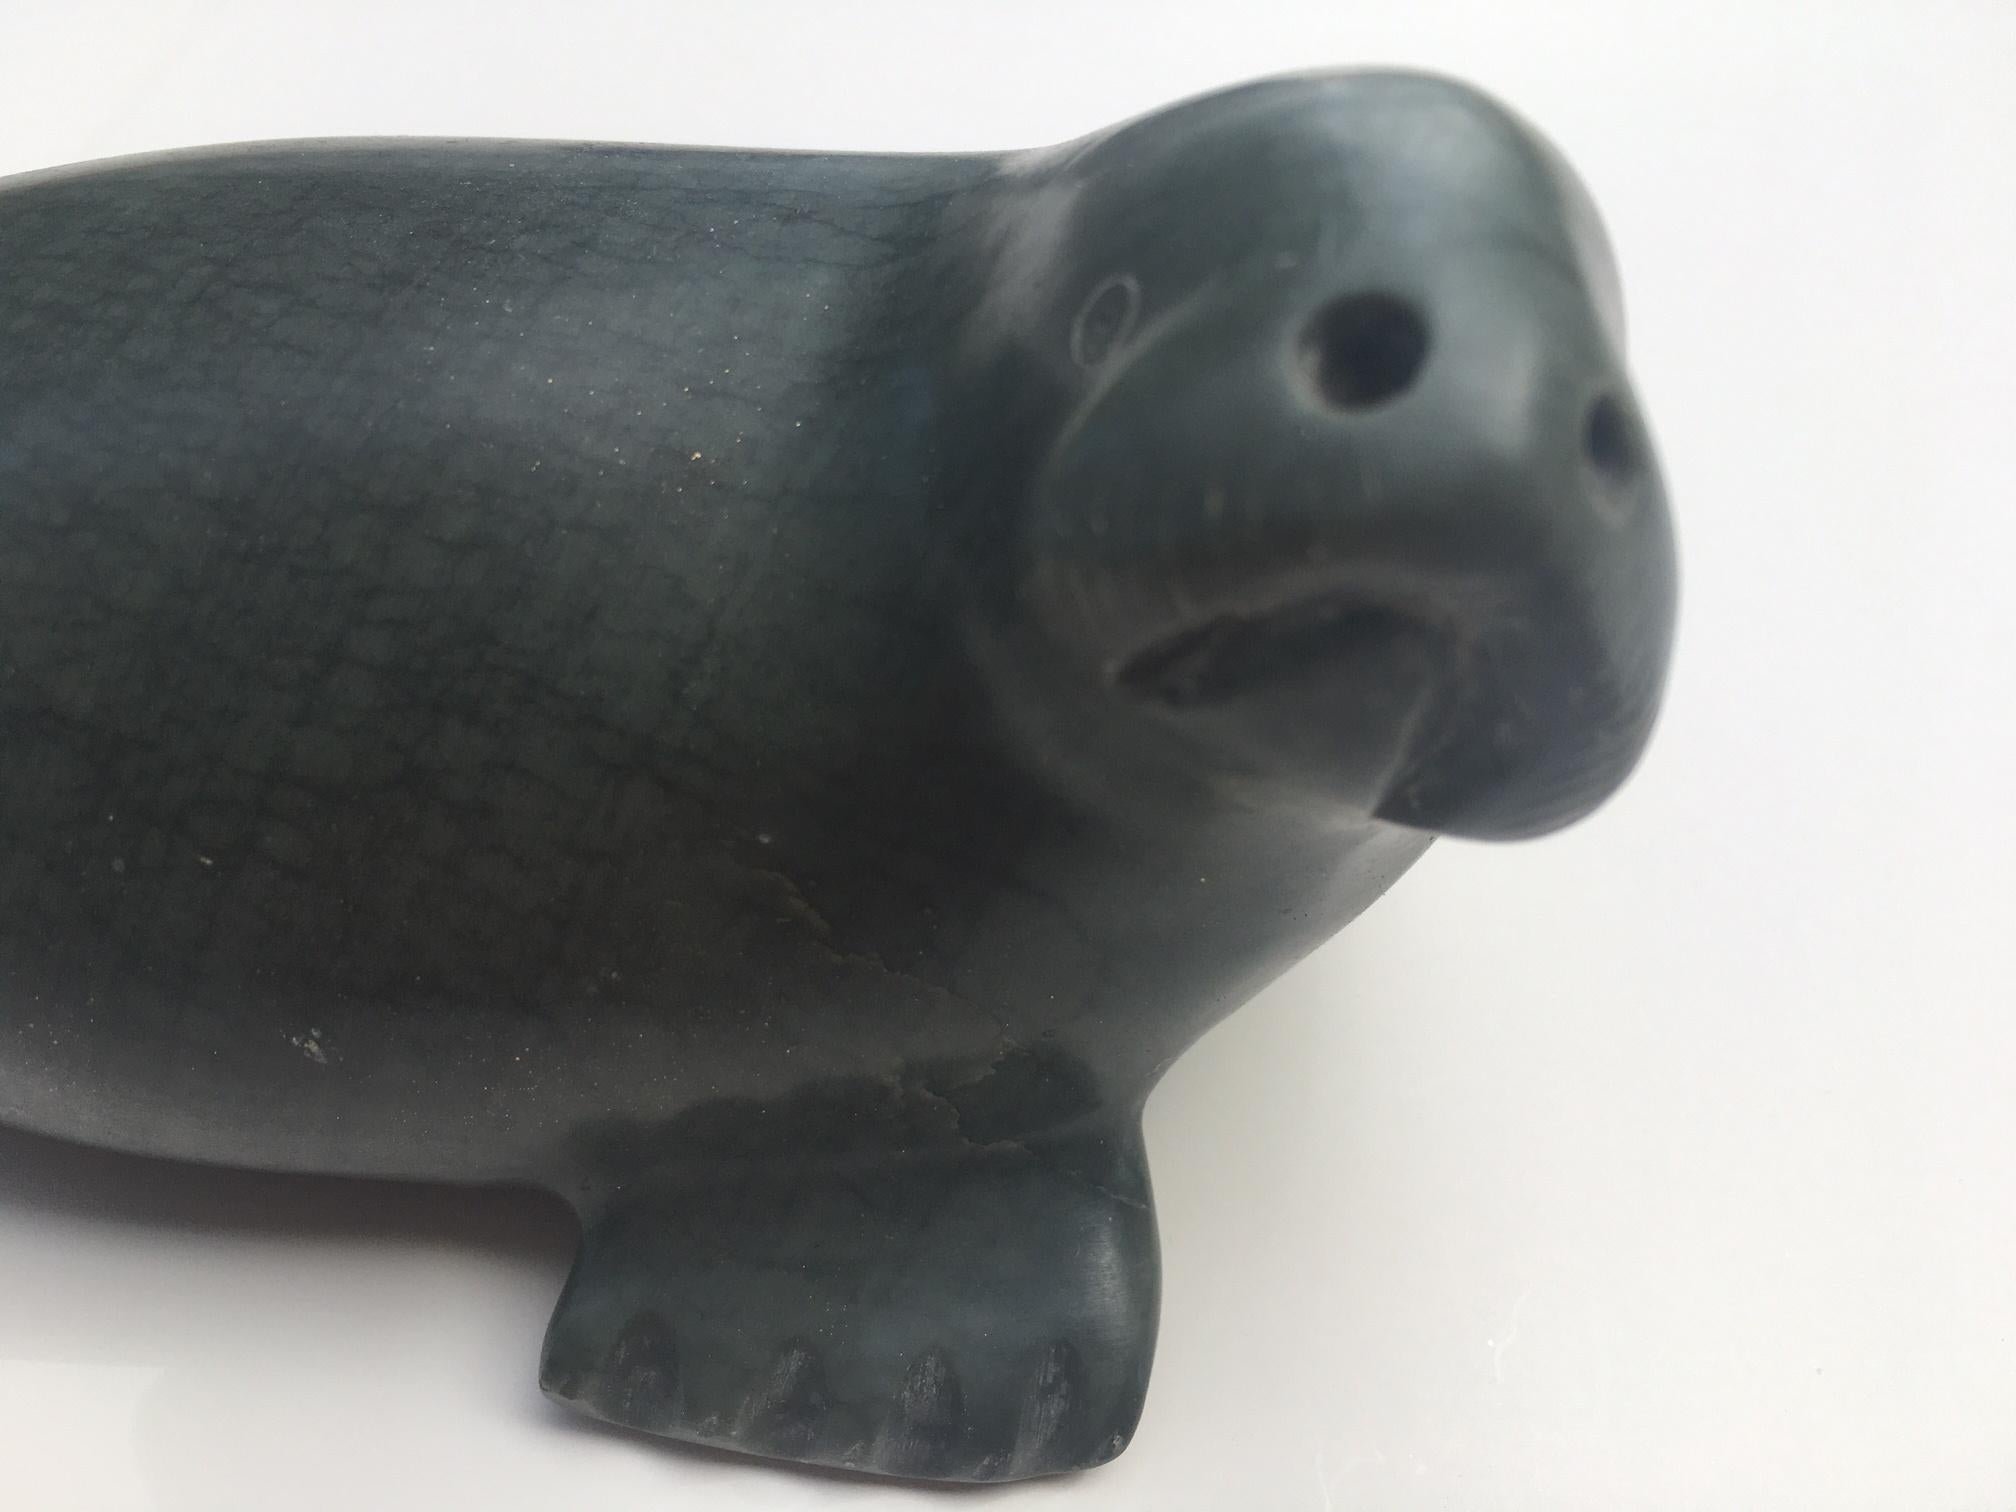 Inuit Stone Seal Sculpture Carving by Pauta Saila 1916 - 2009 2